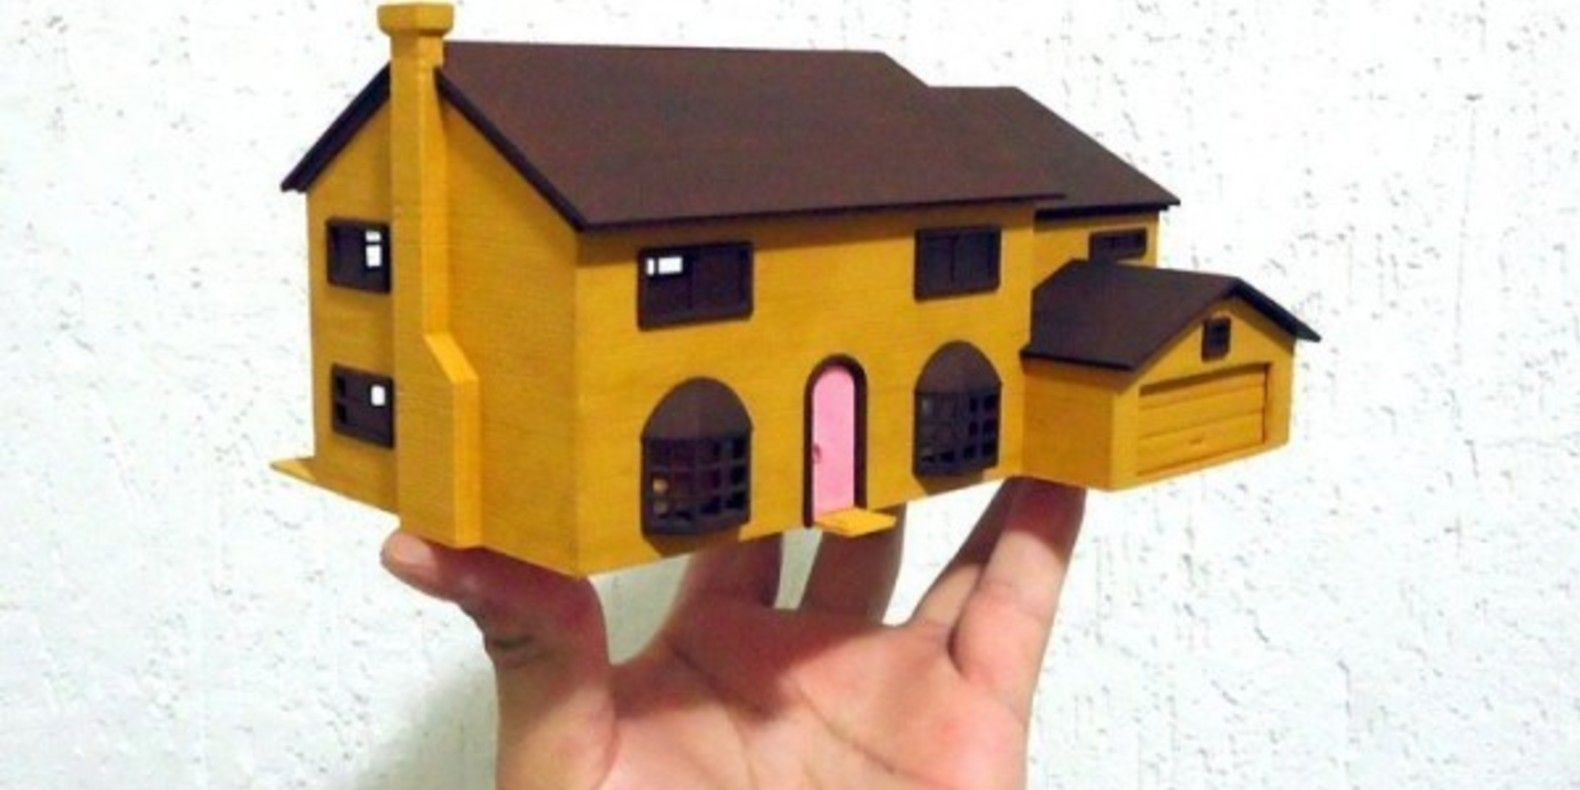 The Simpson's 3D printed house